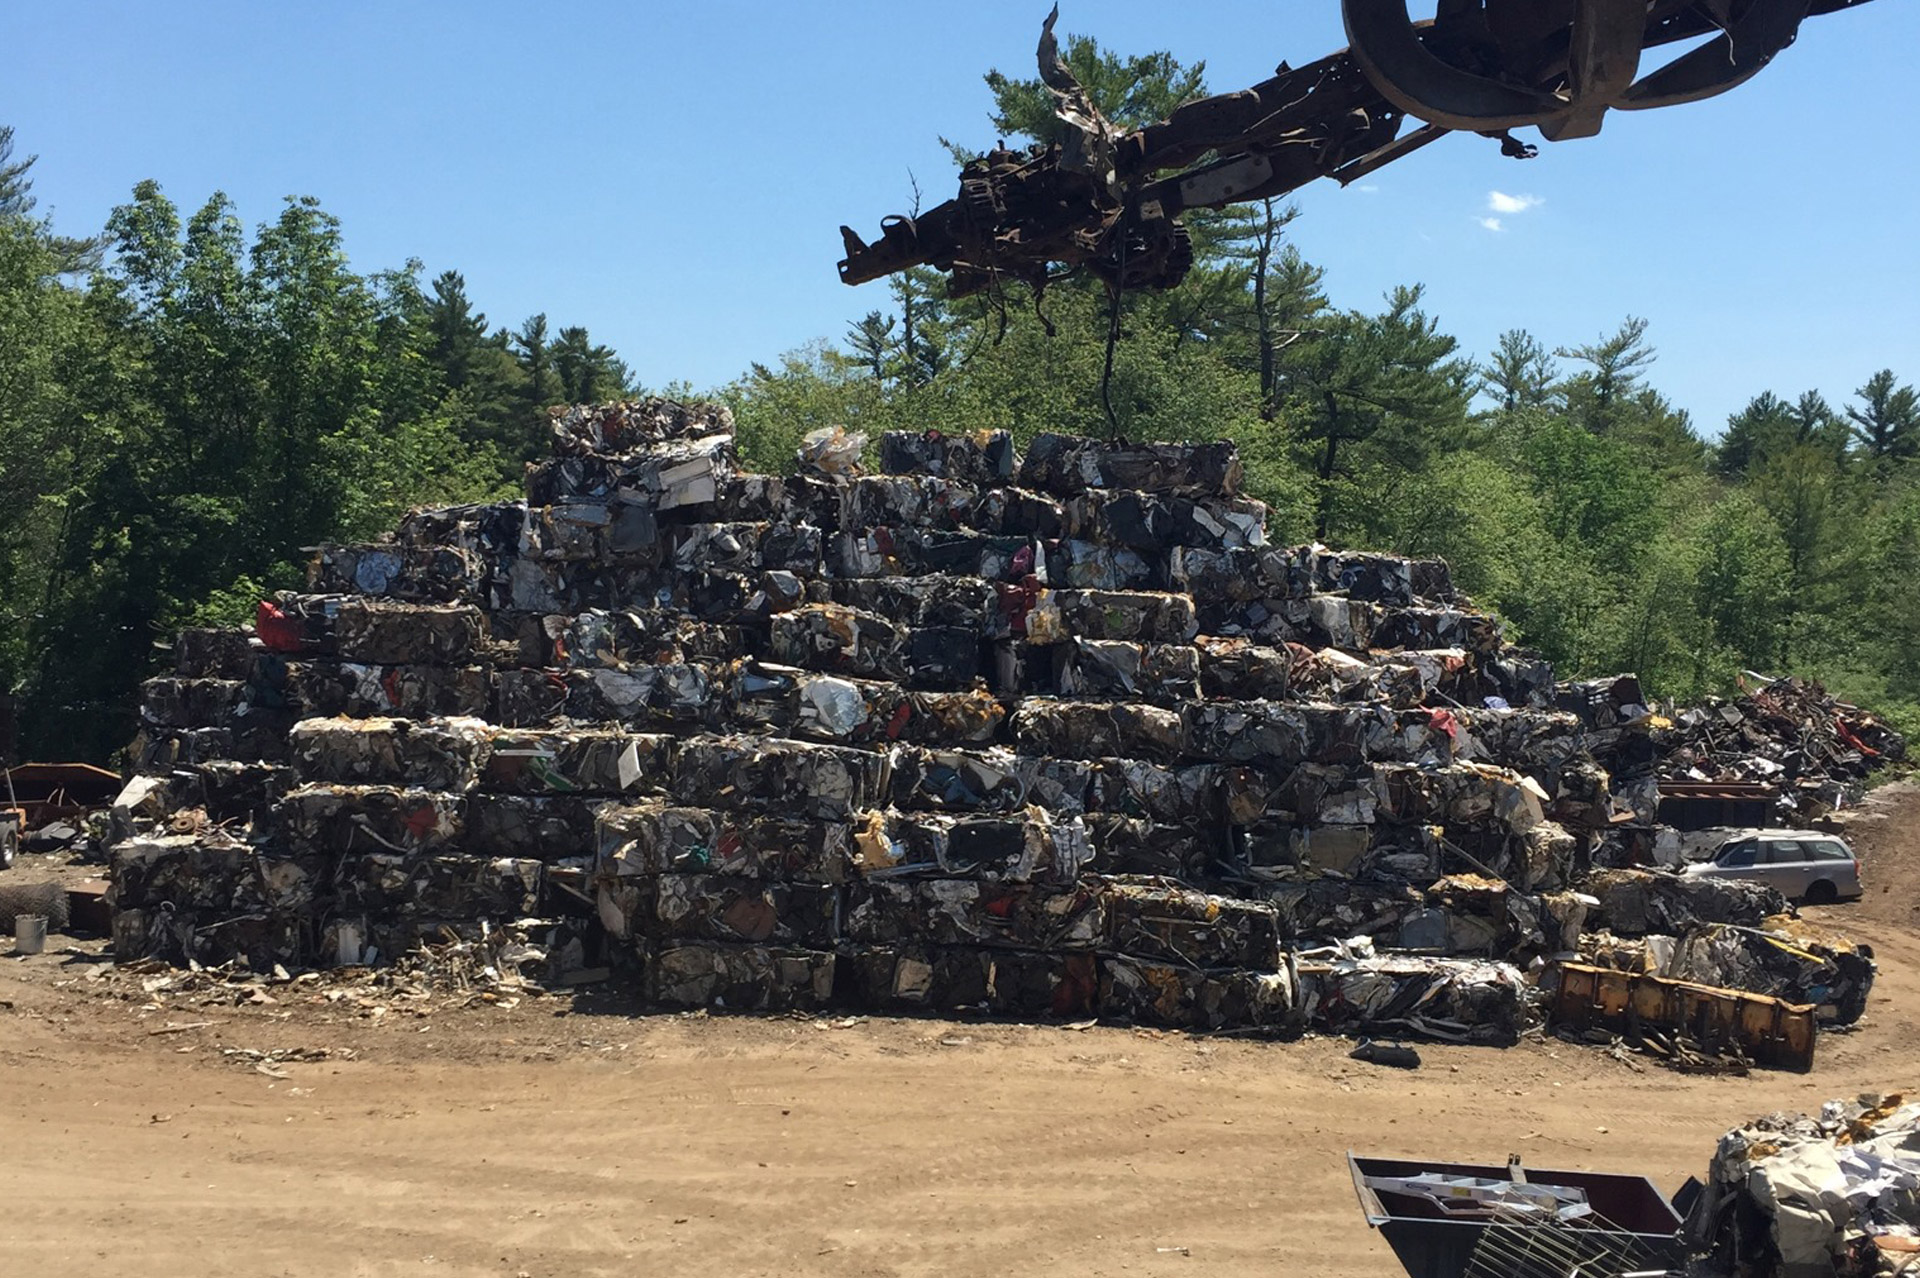 Scrap Metal Recycling & Junk Vehicle Pickups in Holbrook, MA ...